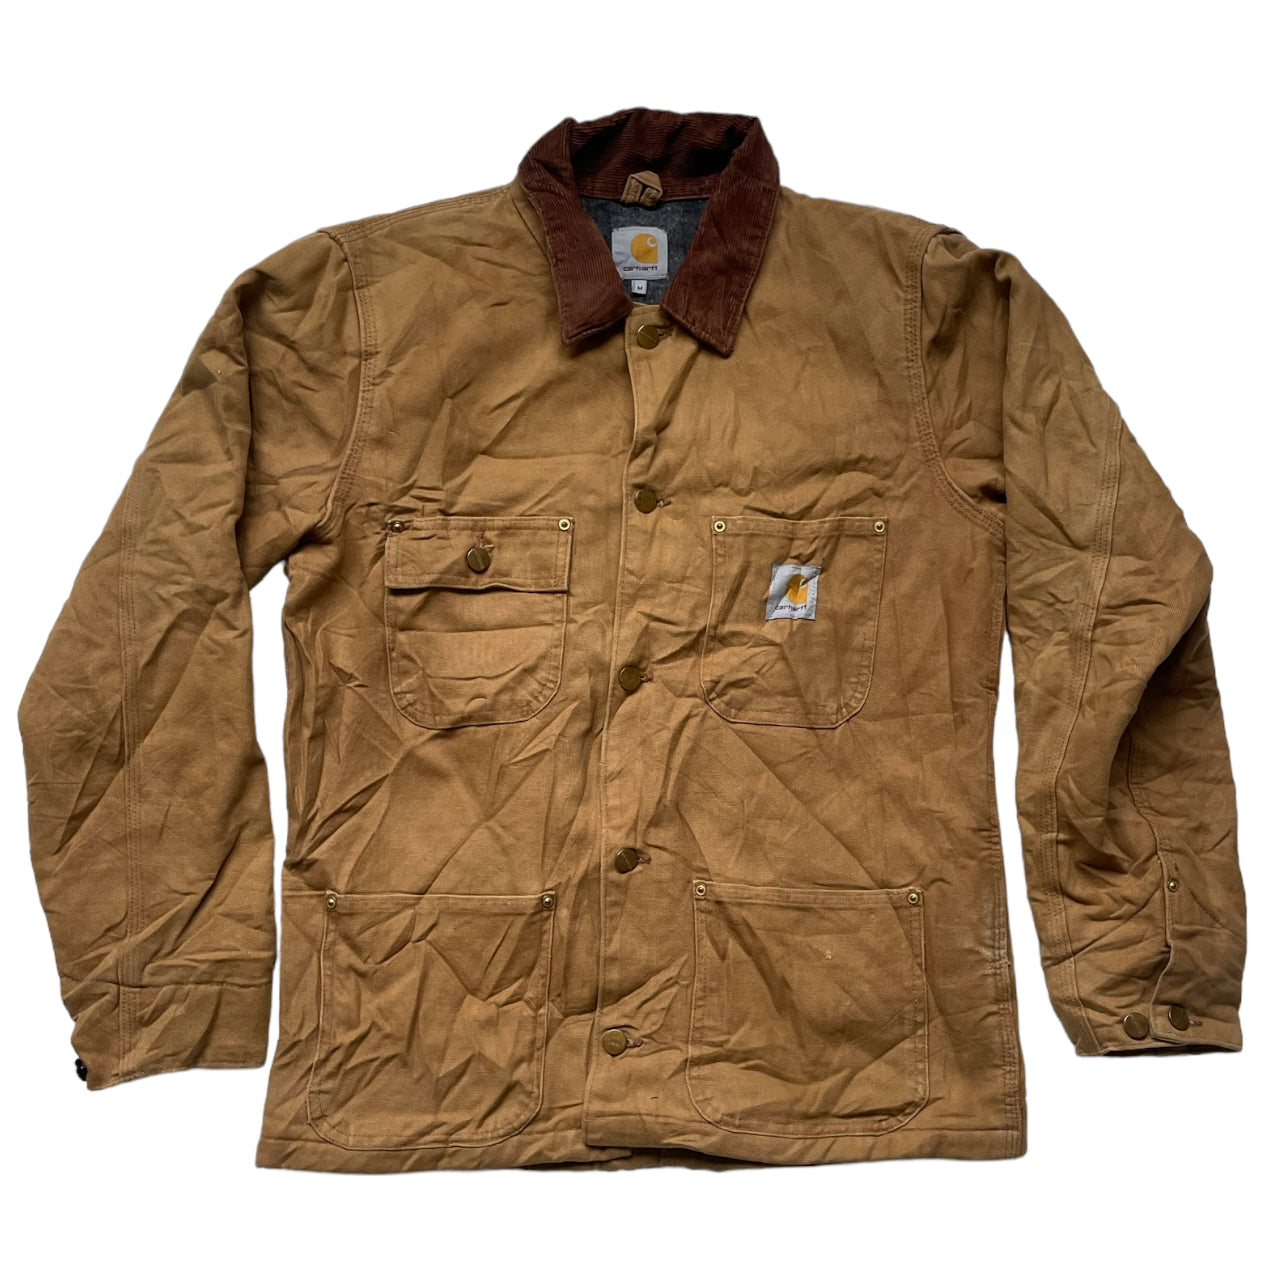 Carhartt Detroit Jacket Blanked Lined Workwear M Size Camel A_45